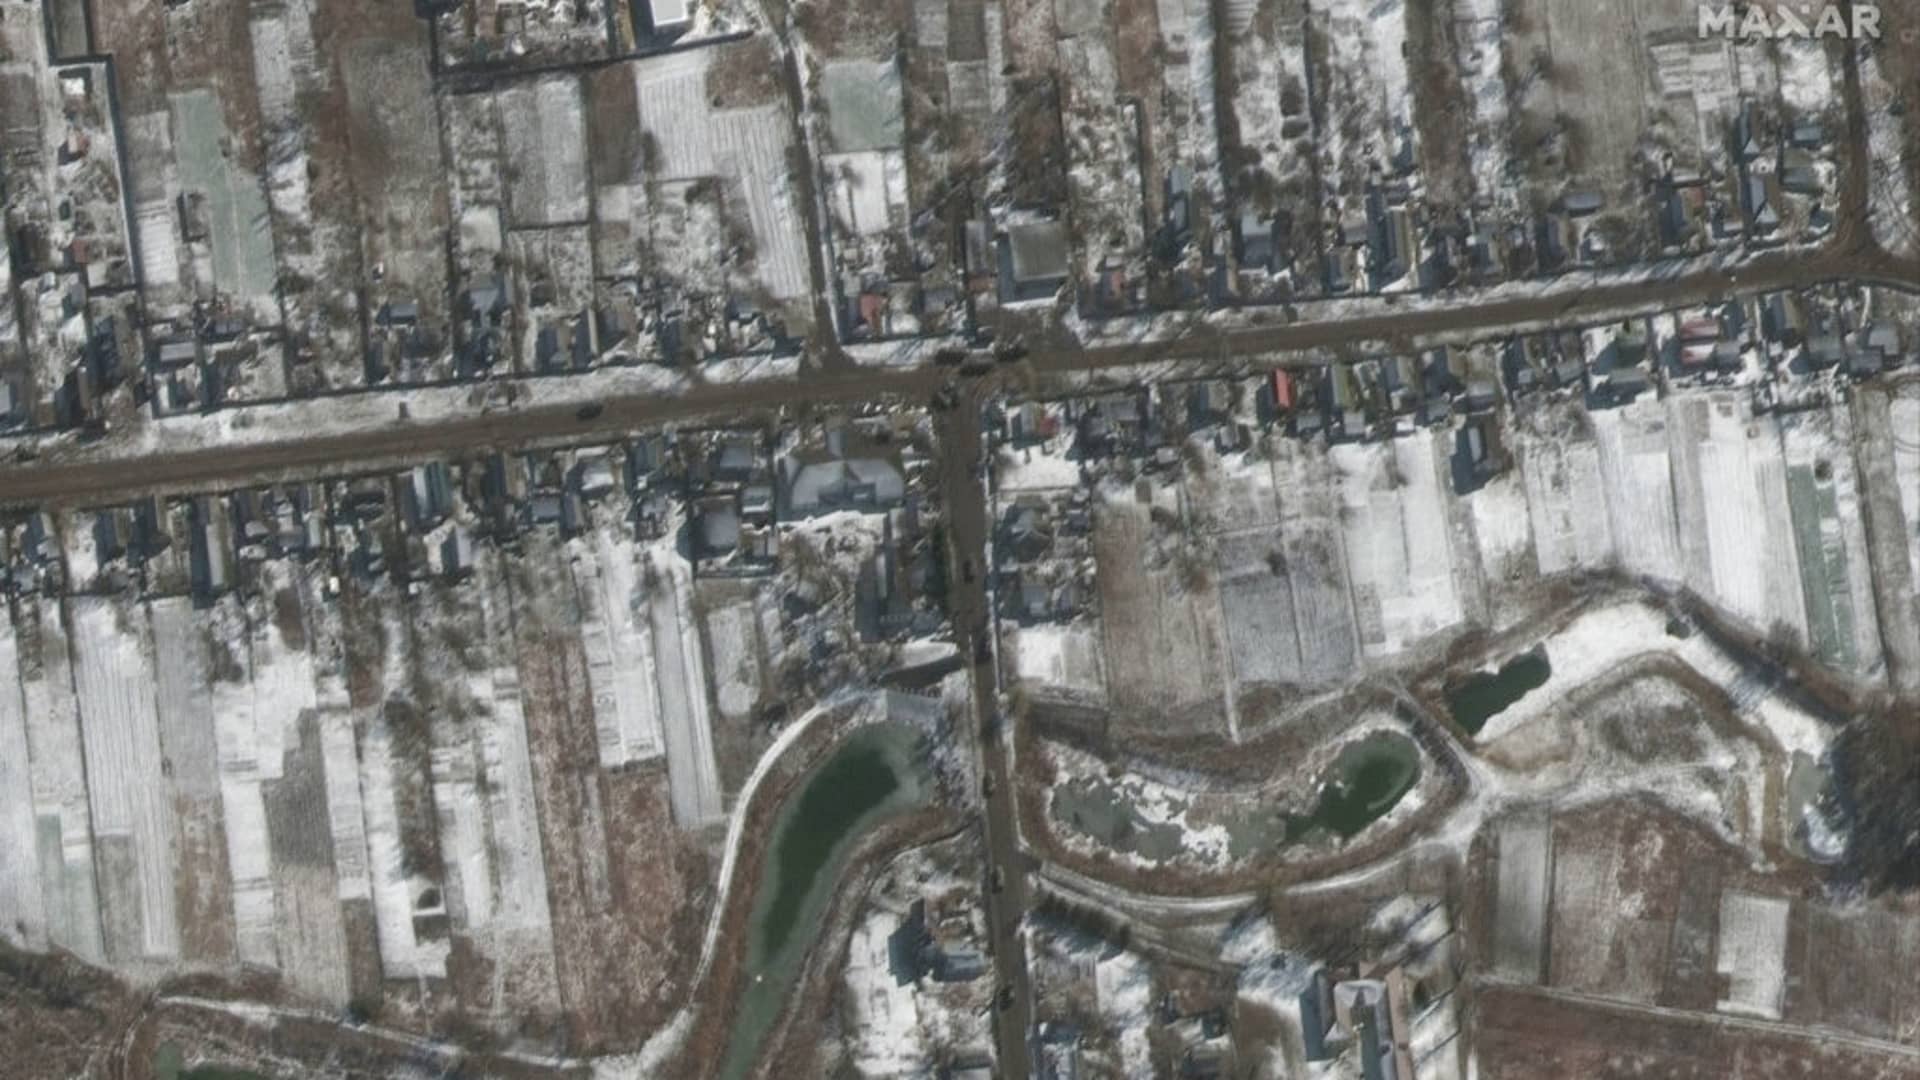 Maxar satellite imagery of troops and equipment deployed in the town of Ozera, Ukraine, northeast of Antonov Airport on the outskirts of Kyiv, on March 10, 2022.